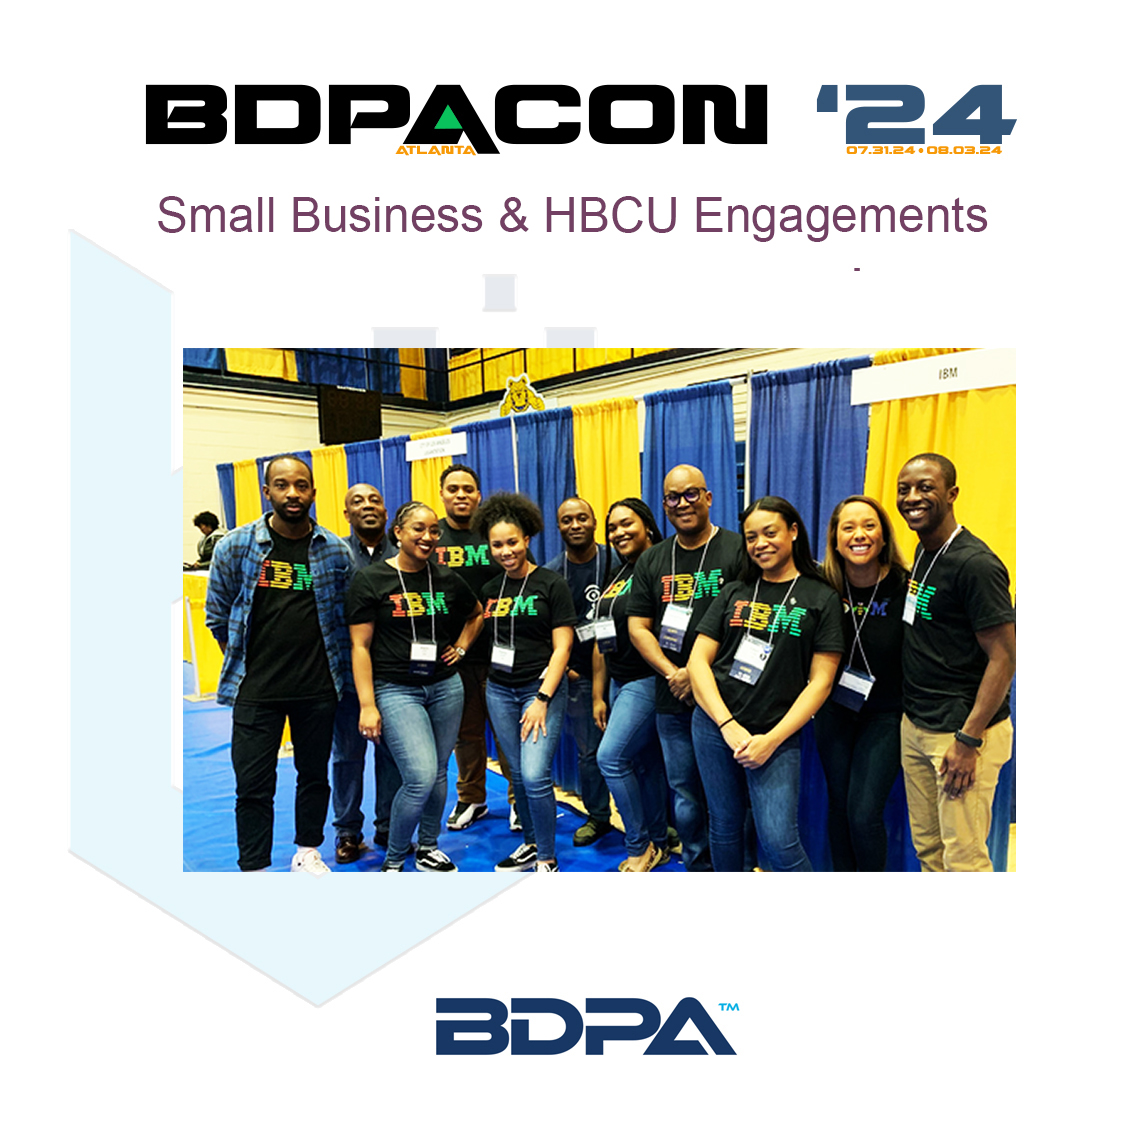 R&D, Small Business, and HBCU engagements